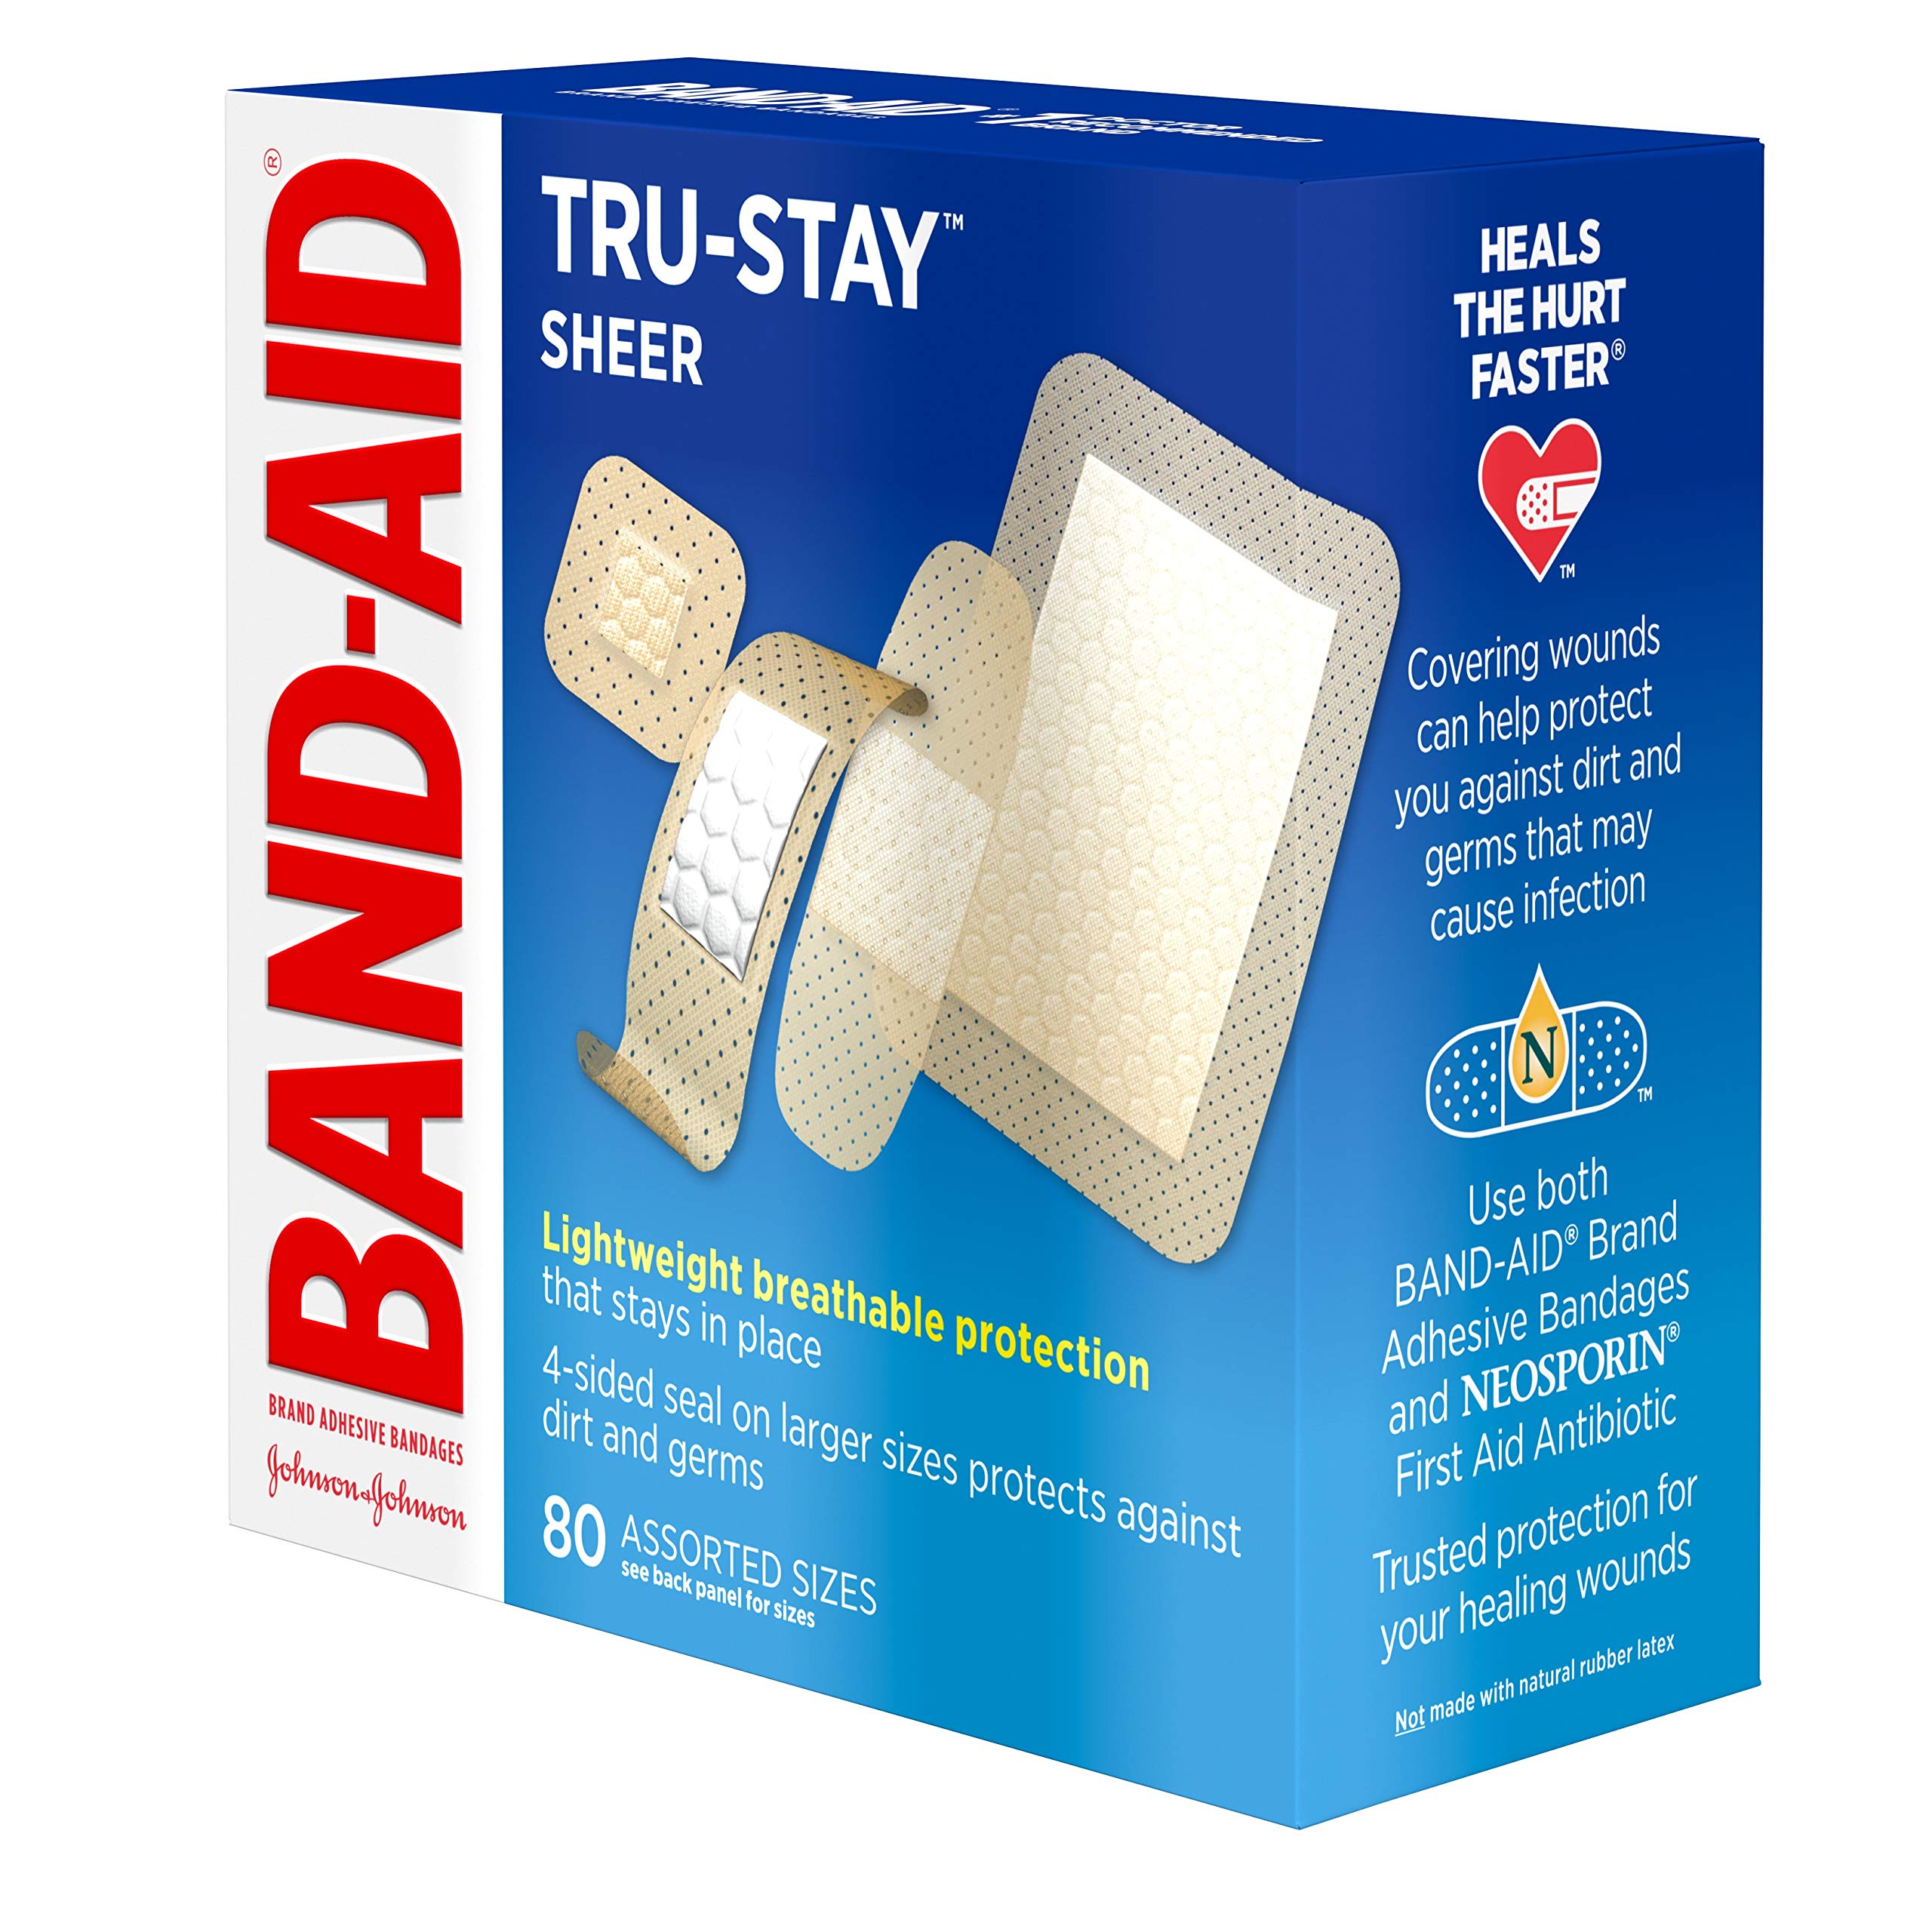 Band-Aid Brand Tru-Stay Sheer Strips Adhesive Bandages for First Aid and Wound Care, Assorted Sizes, 80 ct